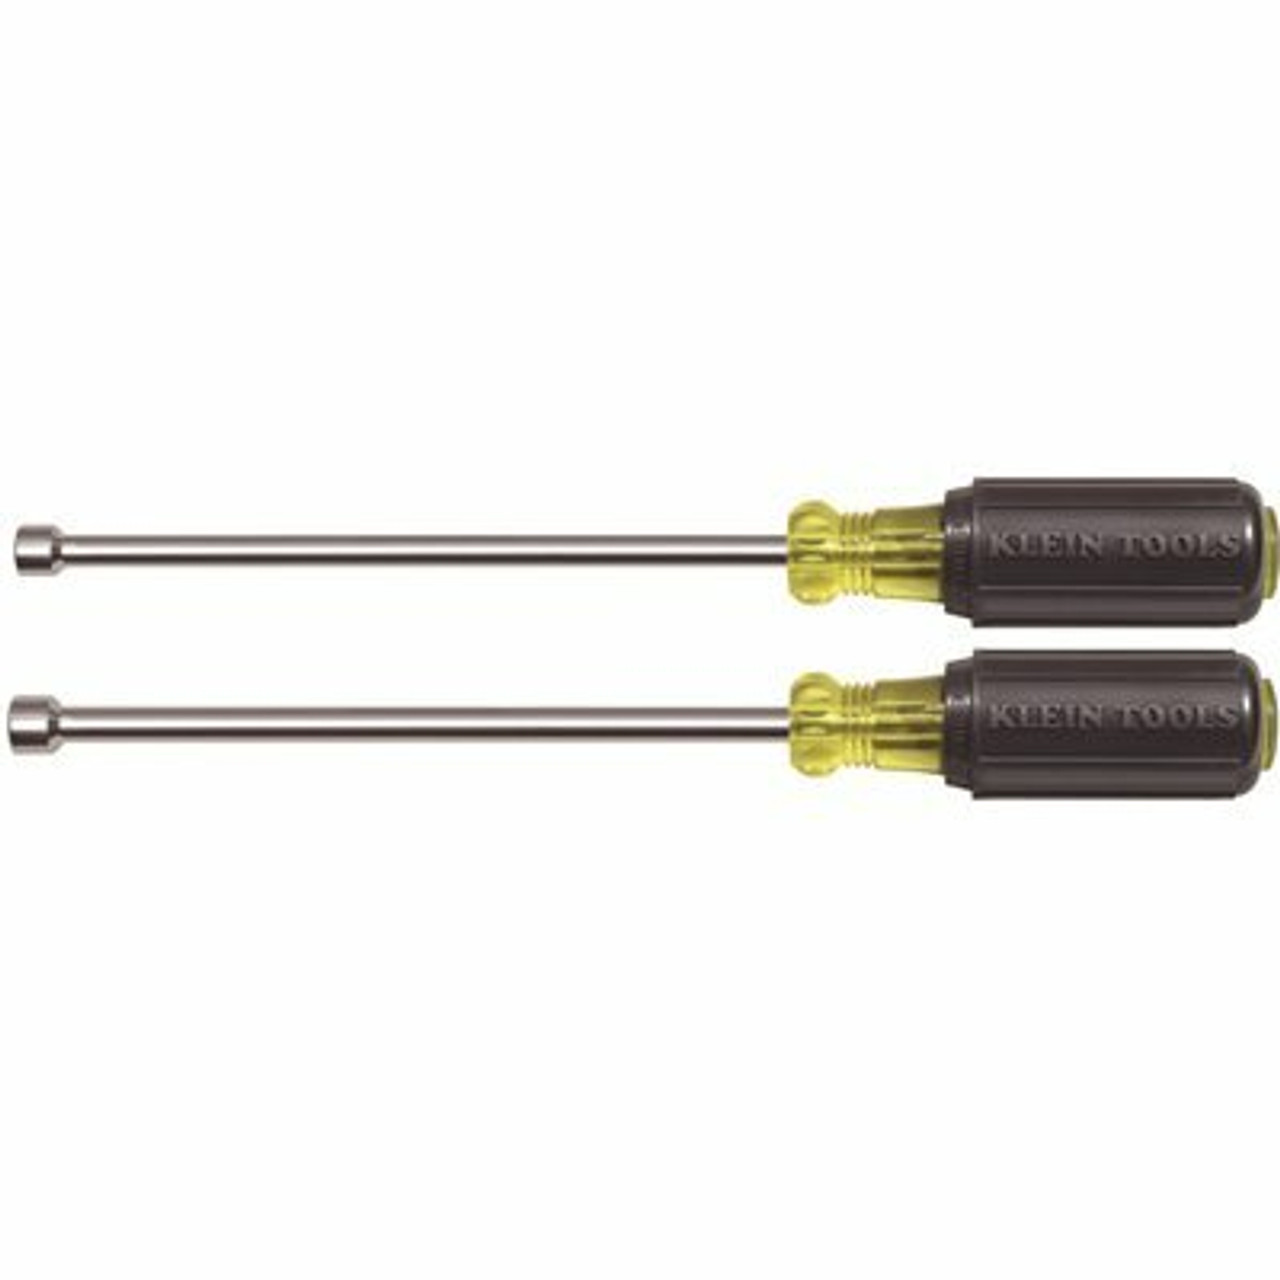 Klein Tools Magnetic Nut Driver Set With 6 In. Shaft (2-Piece)